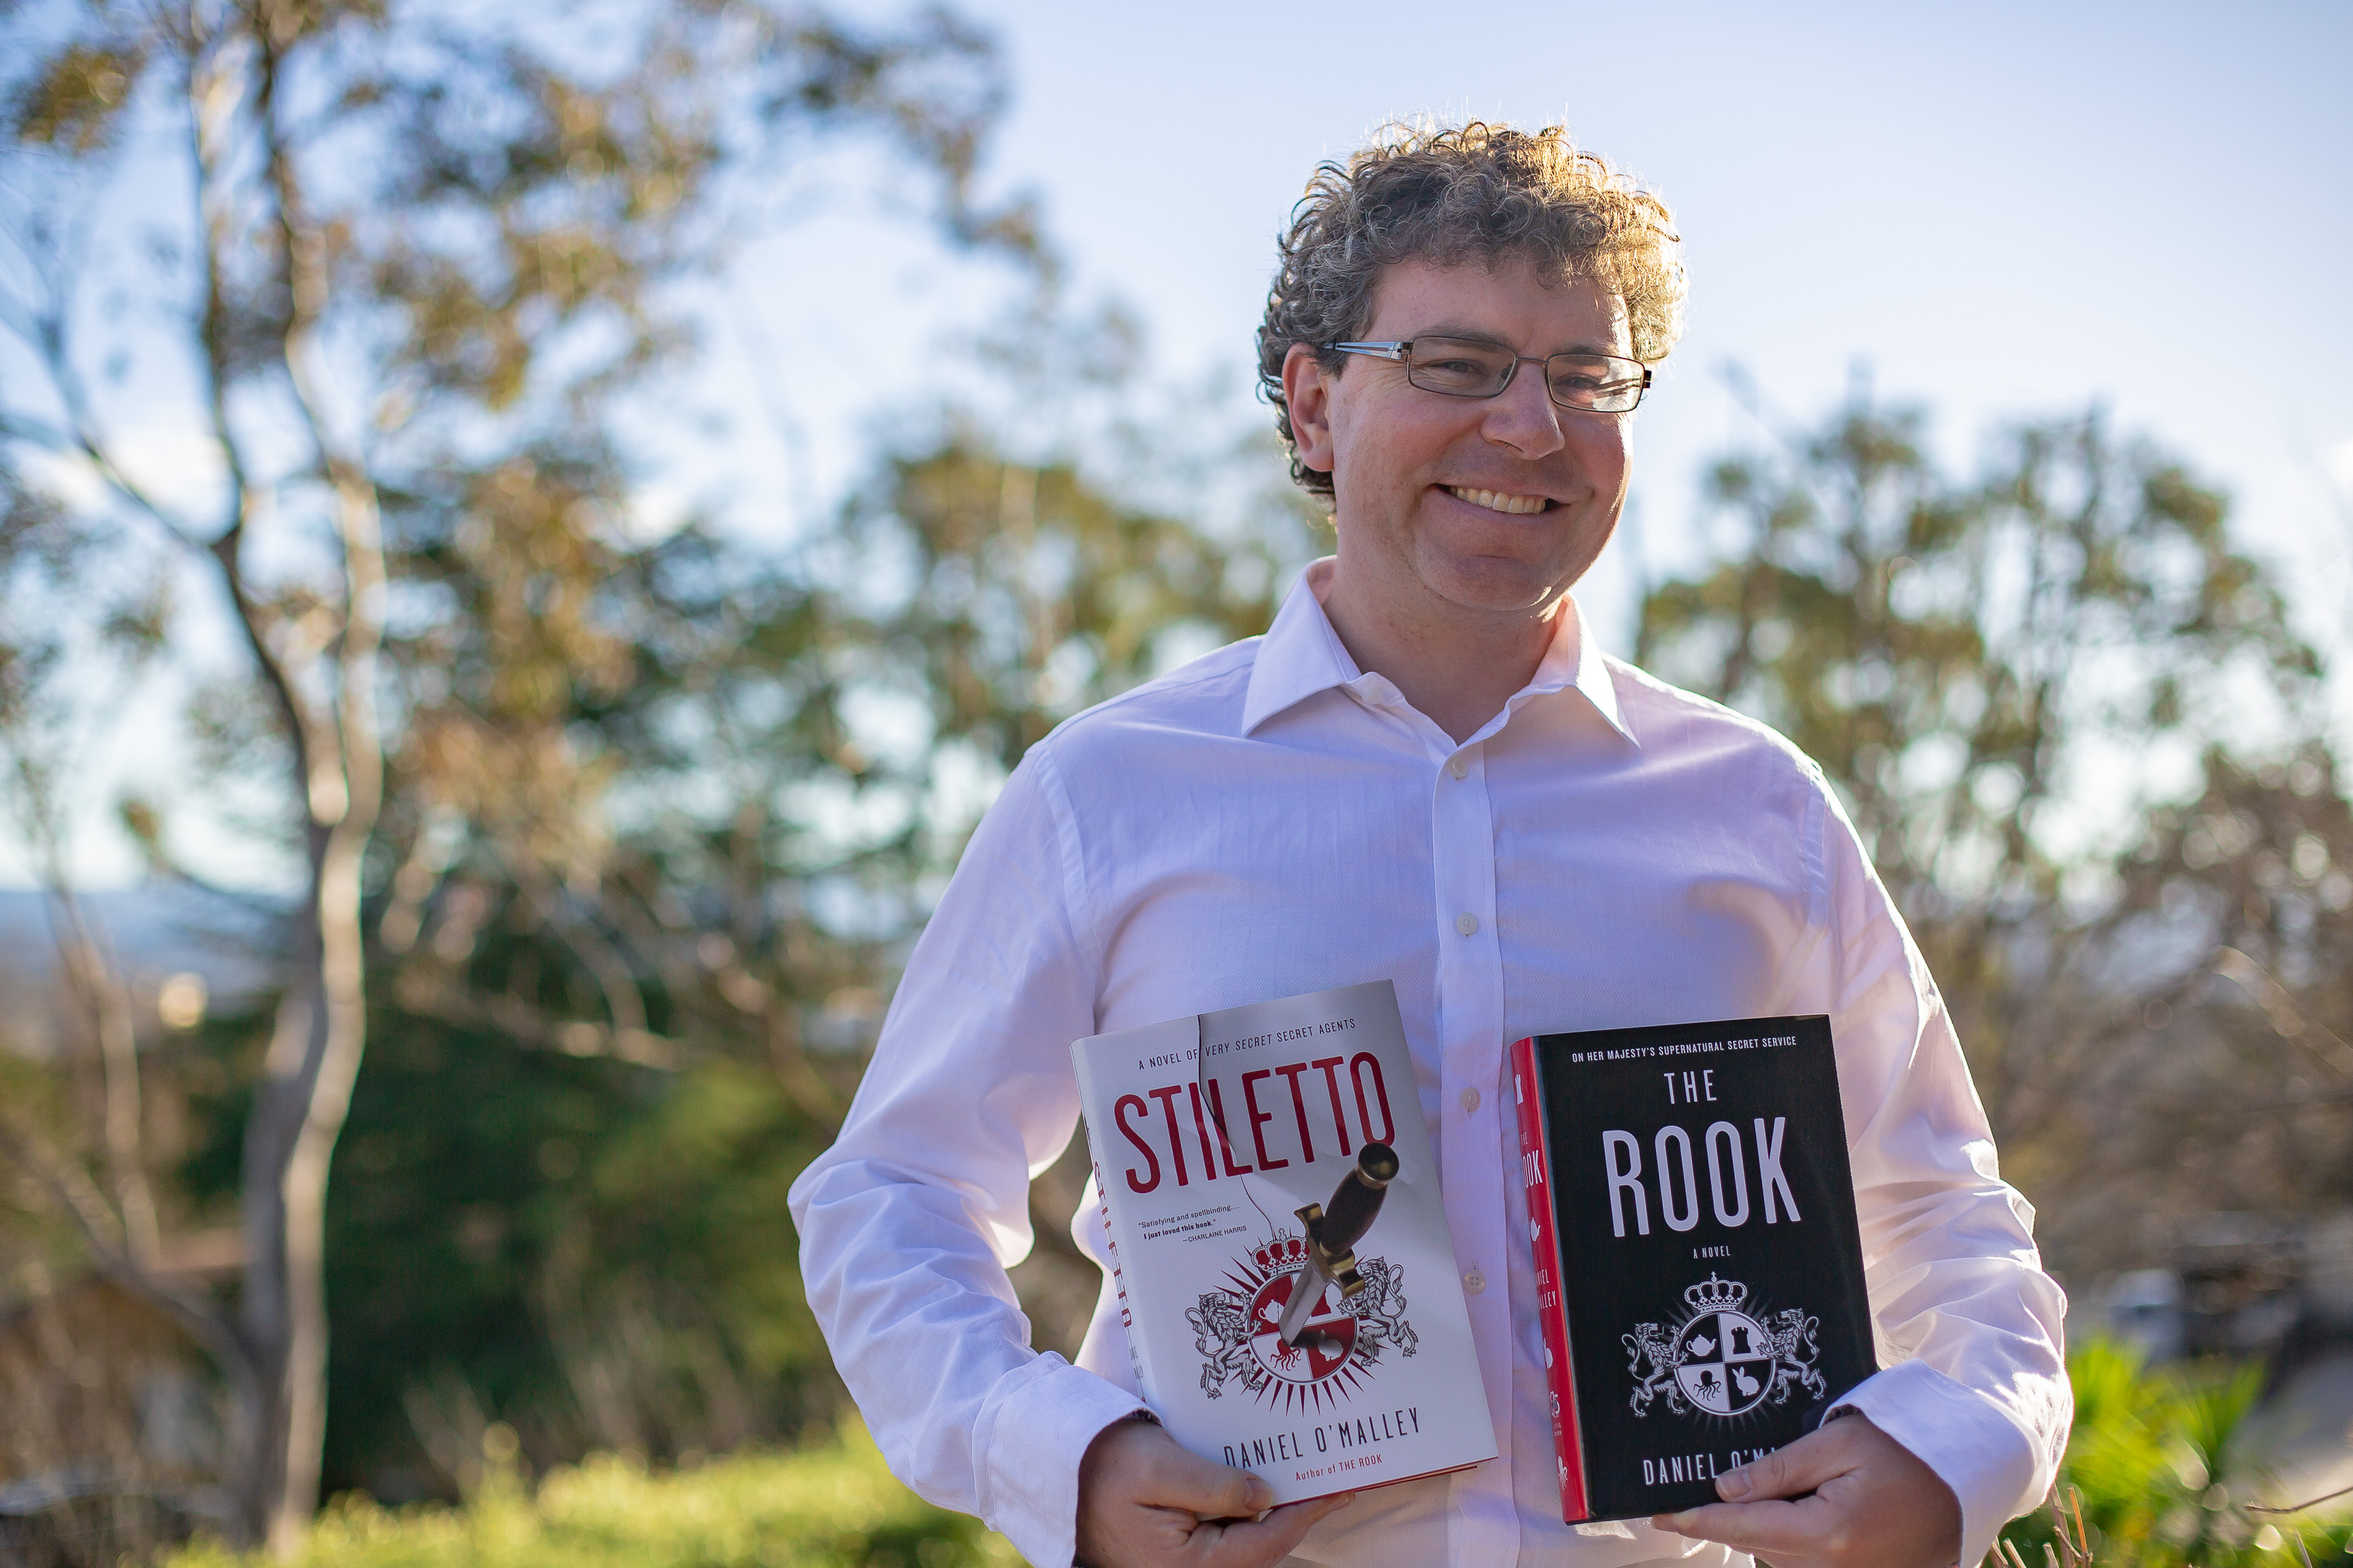 Canberra's Daniel O'Malley the inspiration behind major TV series, The Rook